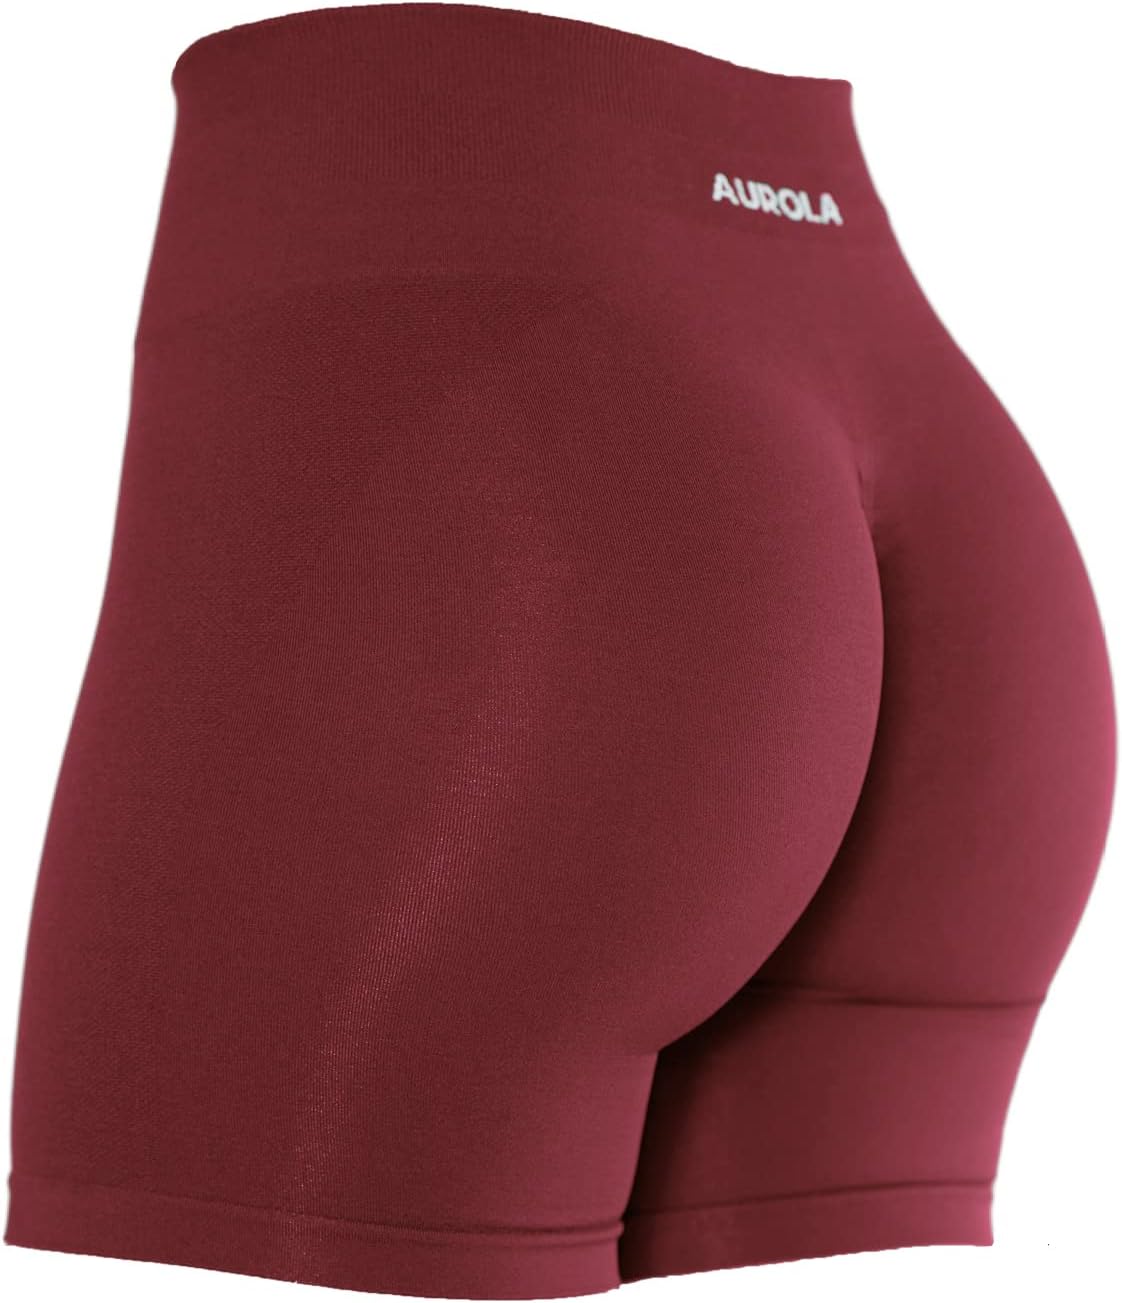 AUROLA Energetic Workout Shorts for Women Seamless Scrunch Athletic Gym  Fitness Active Shorts Black at  Women's Clothing store